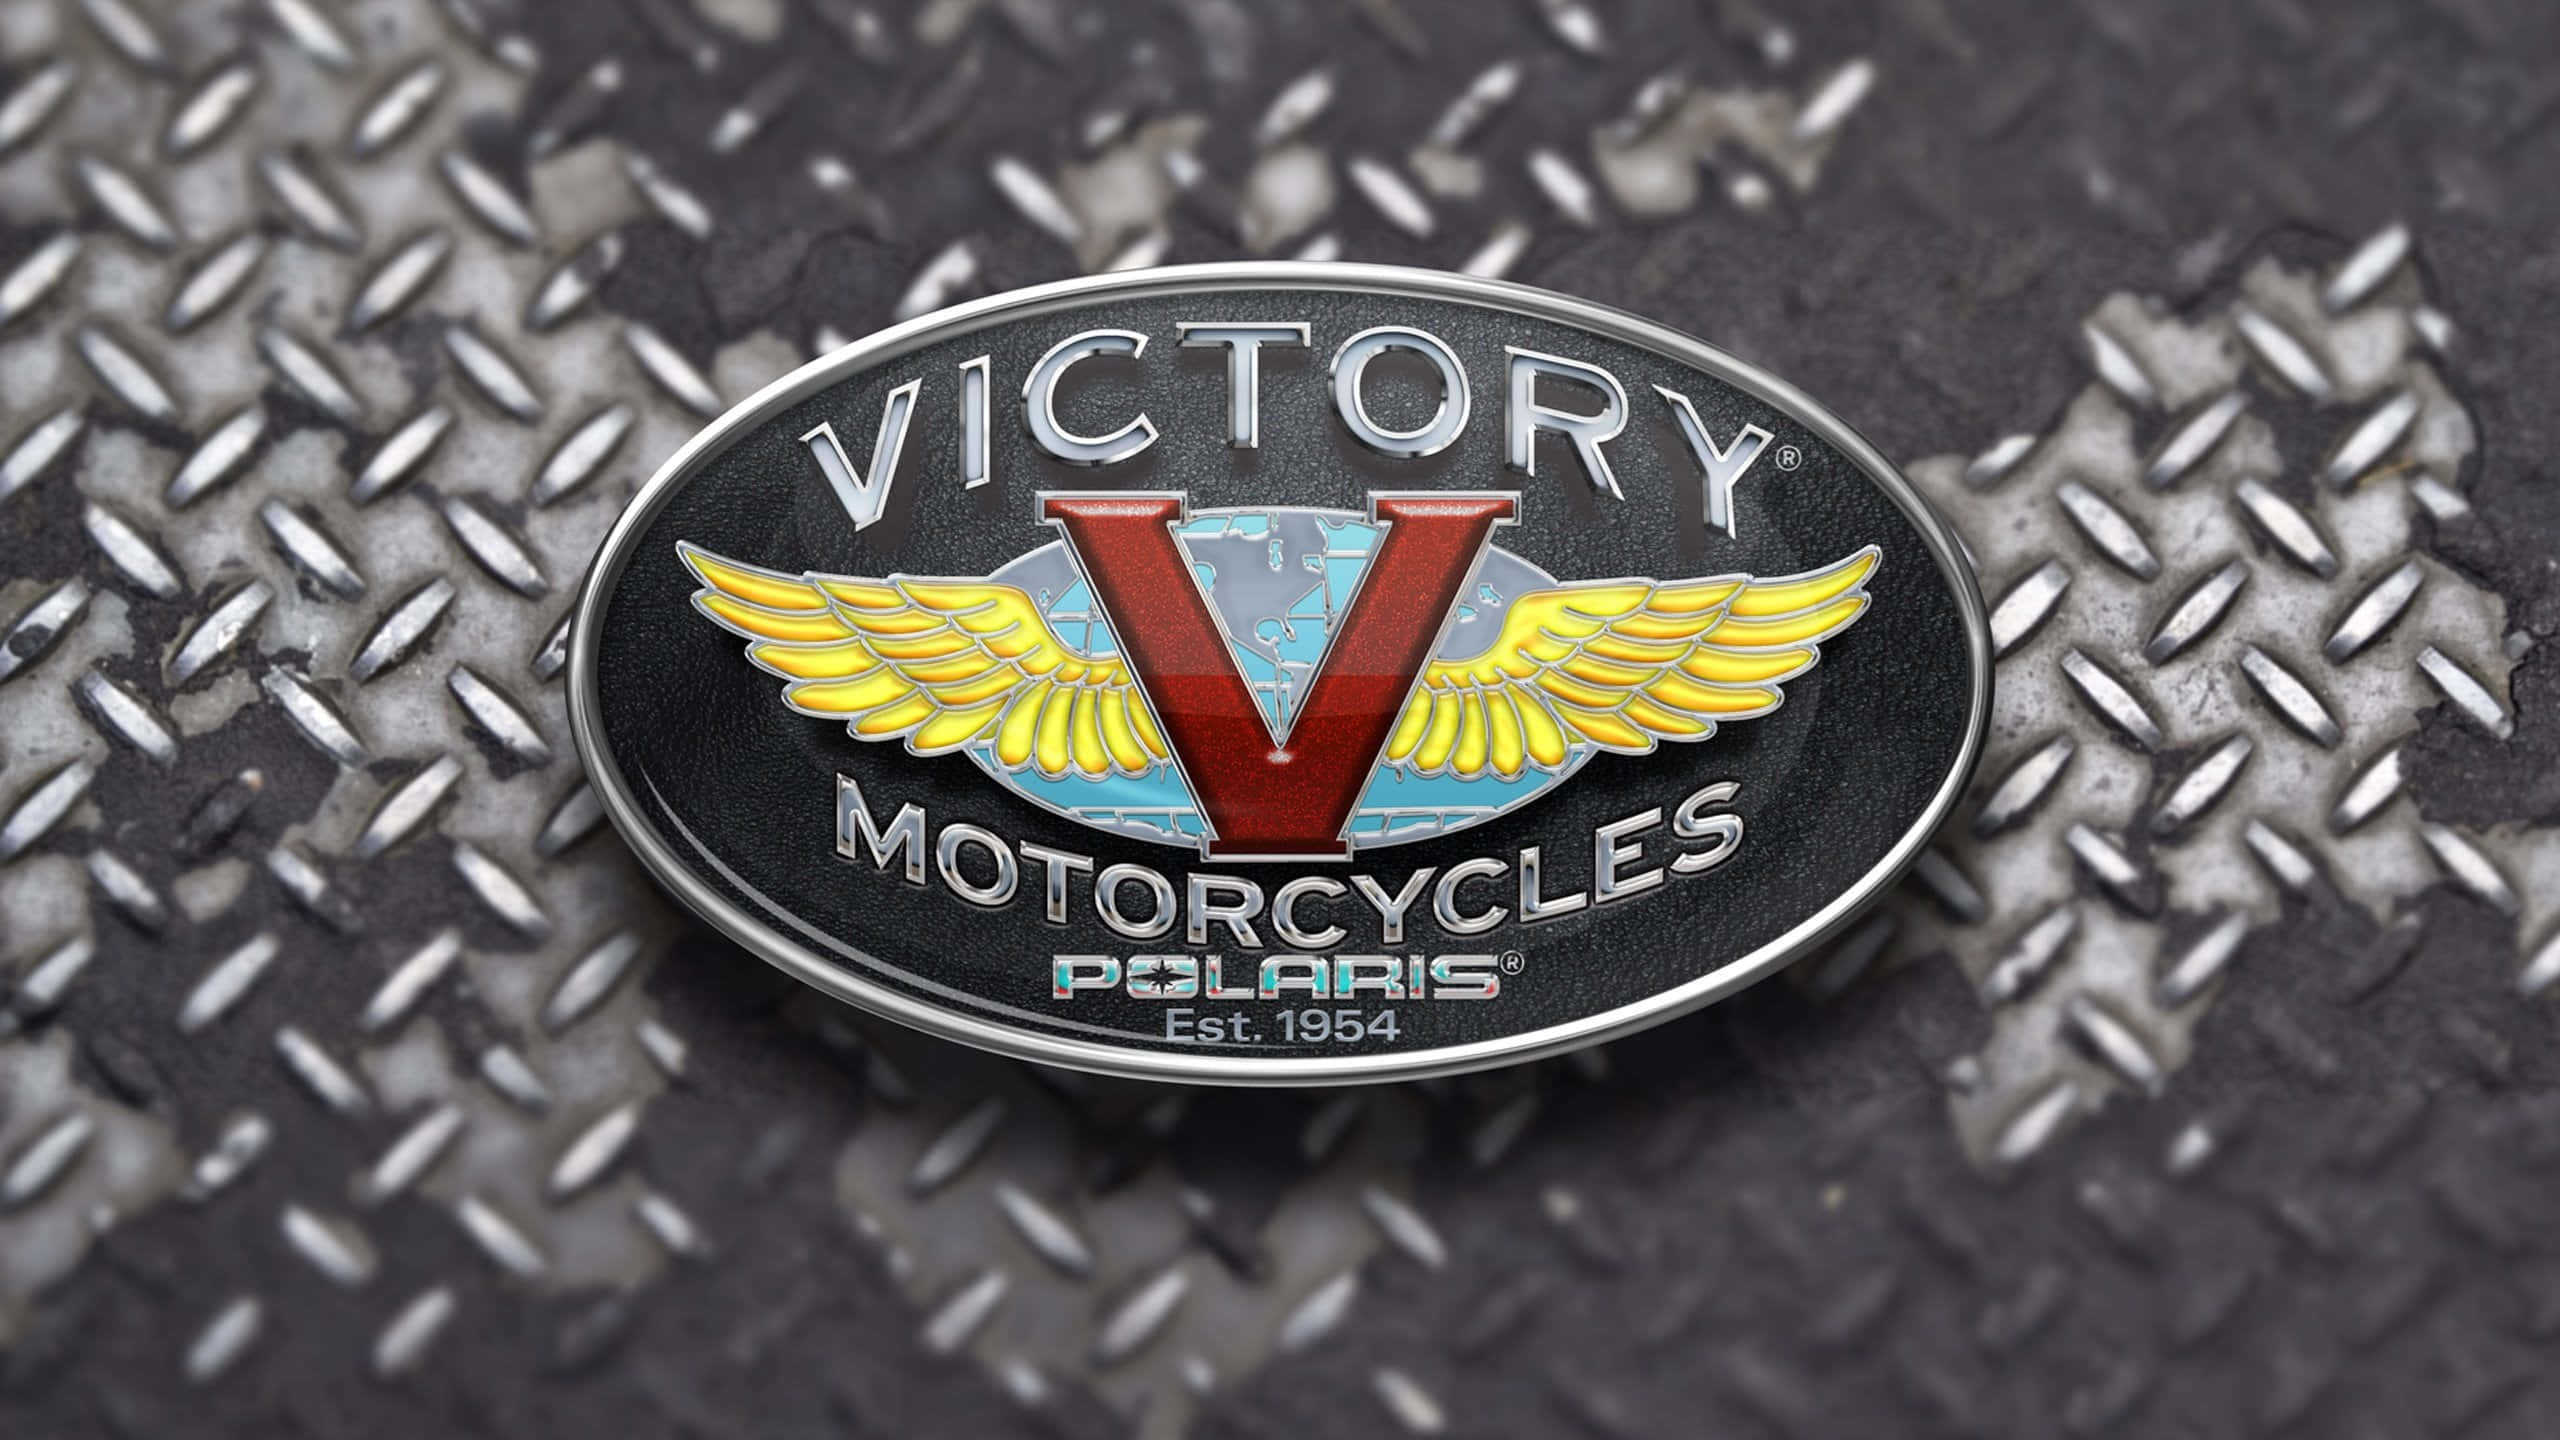 A Stunning Victory Motorcycle Ready To Hit The Road Background